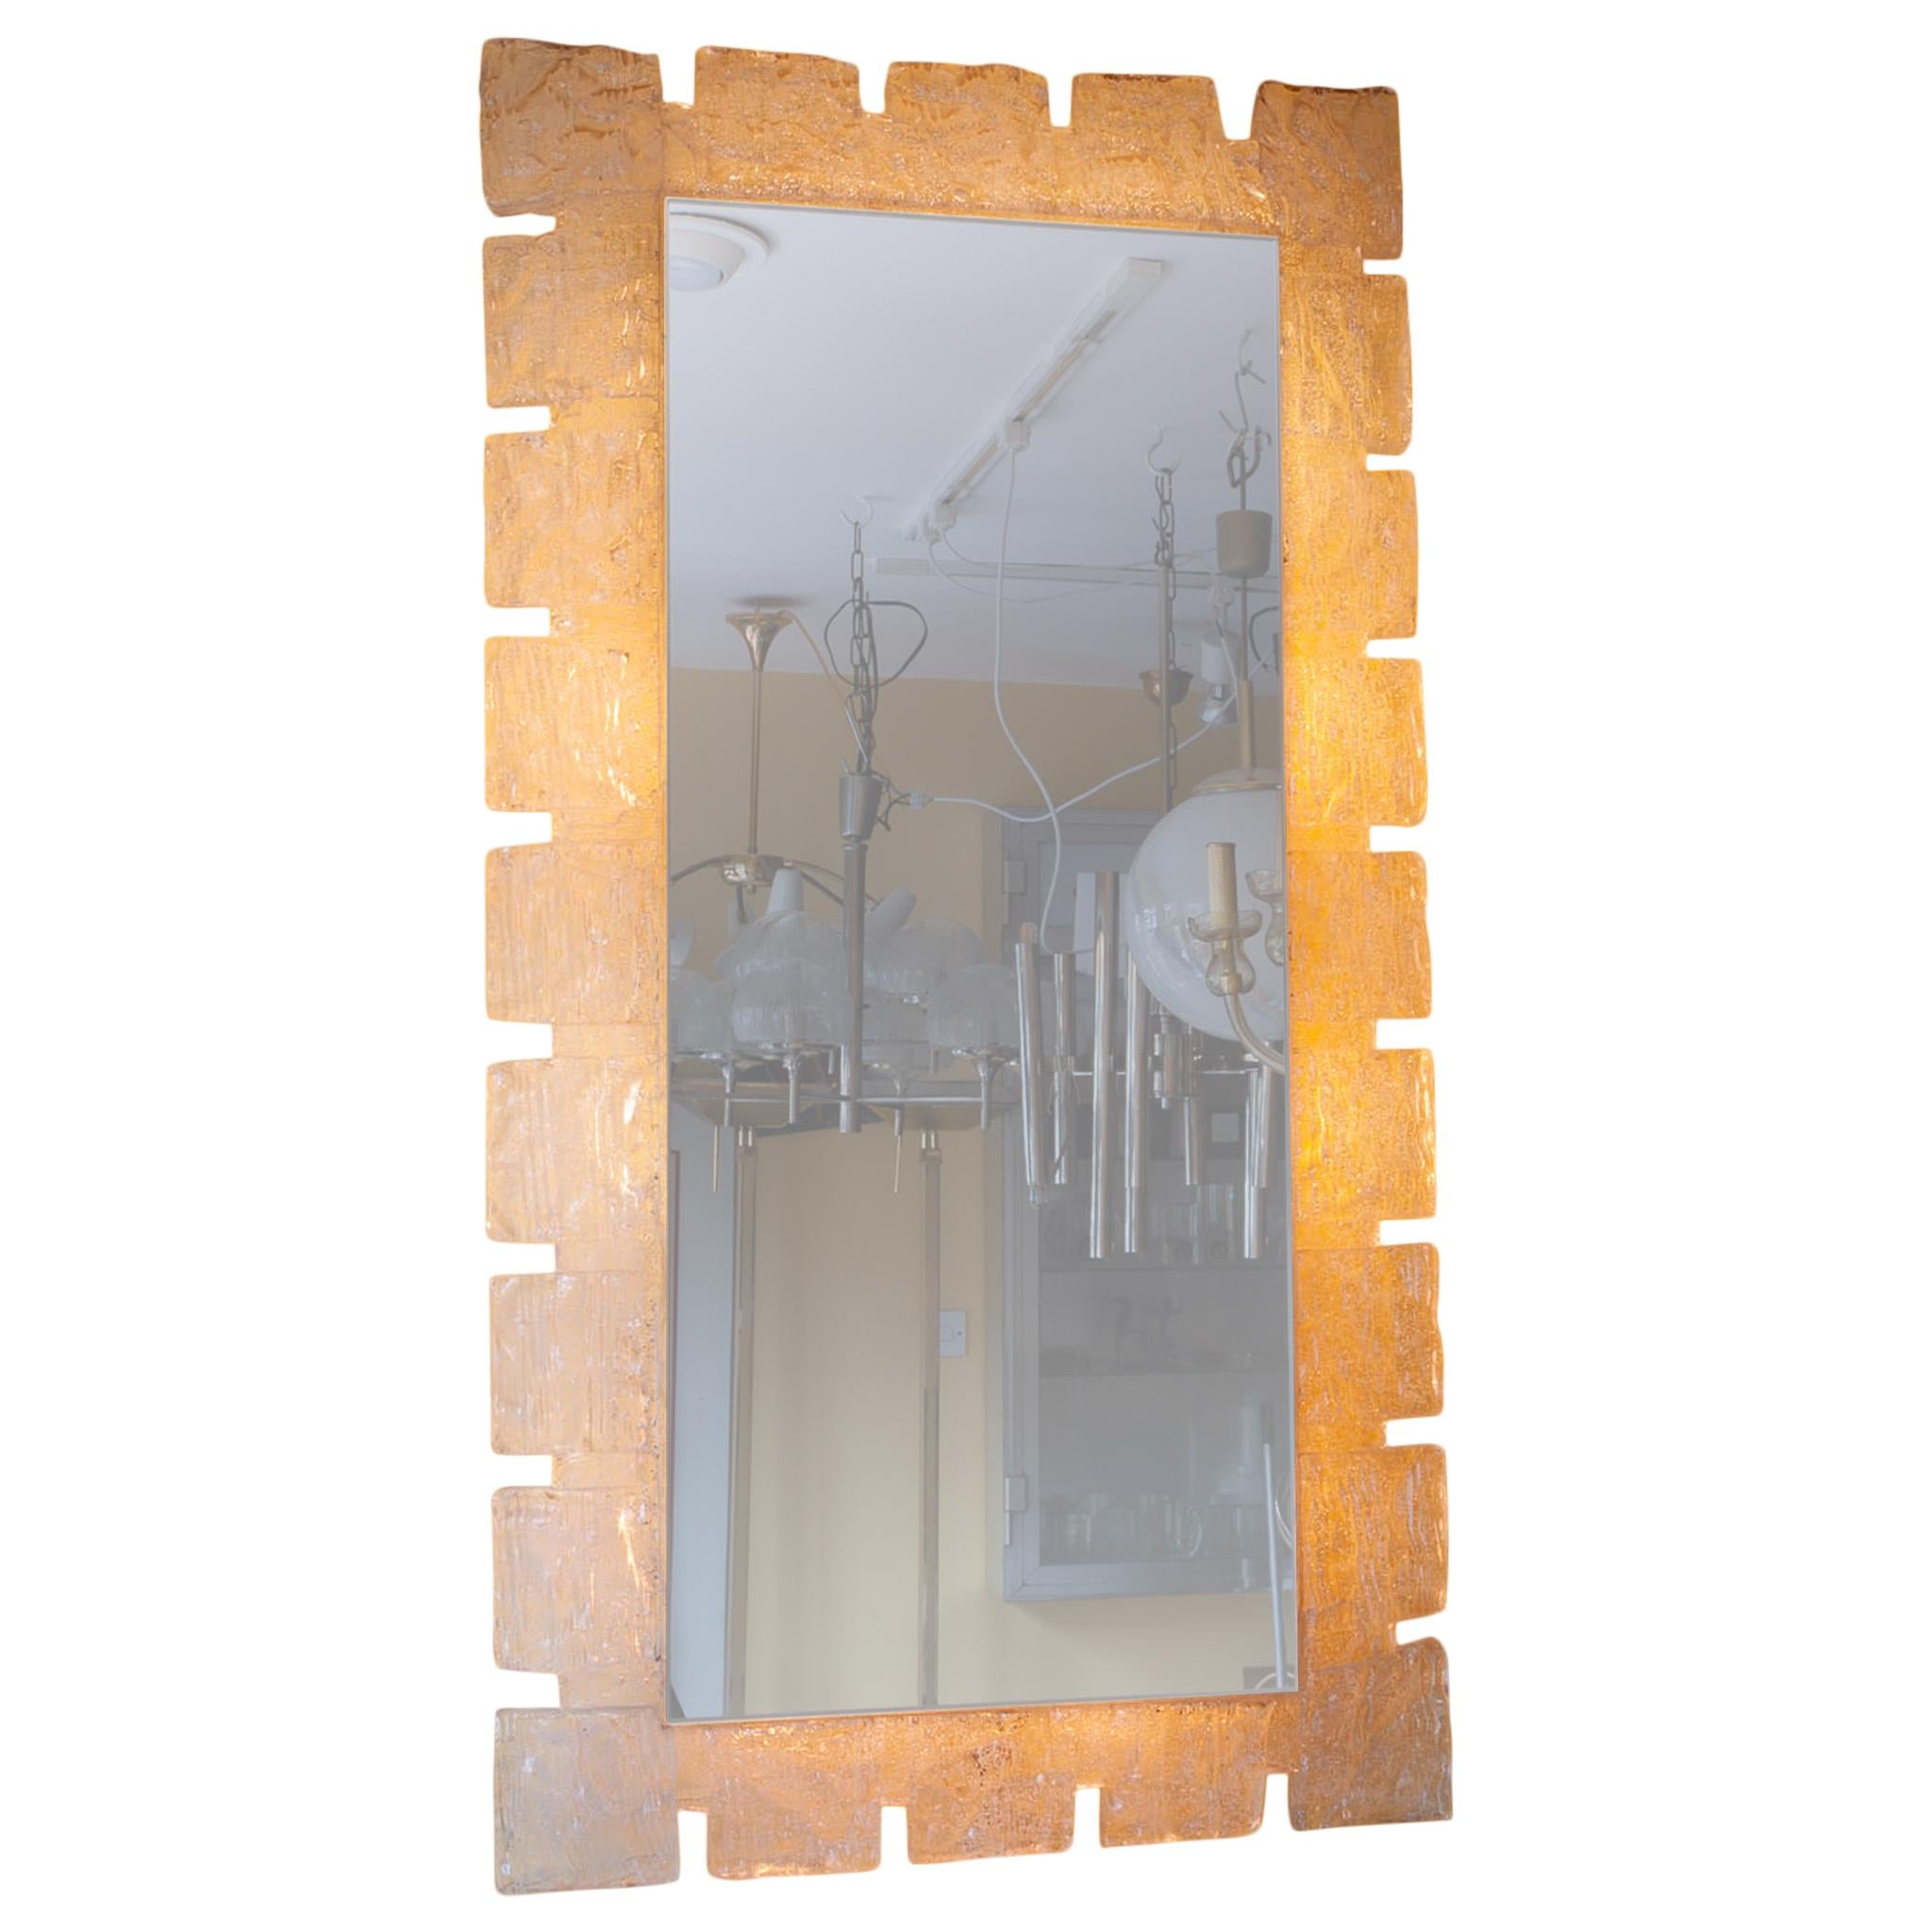 1970s German Hillebrand Backlit Wall Mirror with Acrylic Frosted Iced Surround